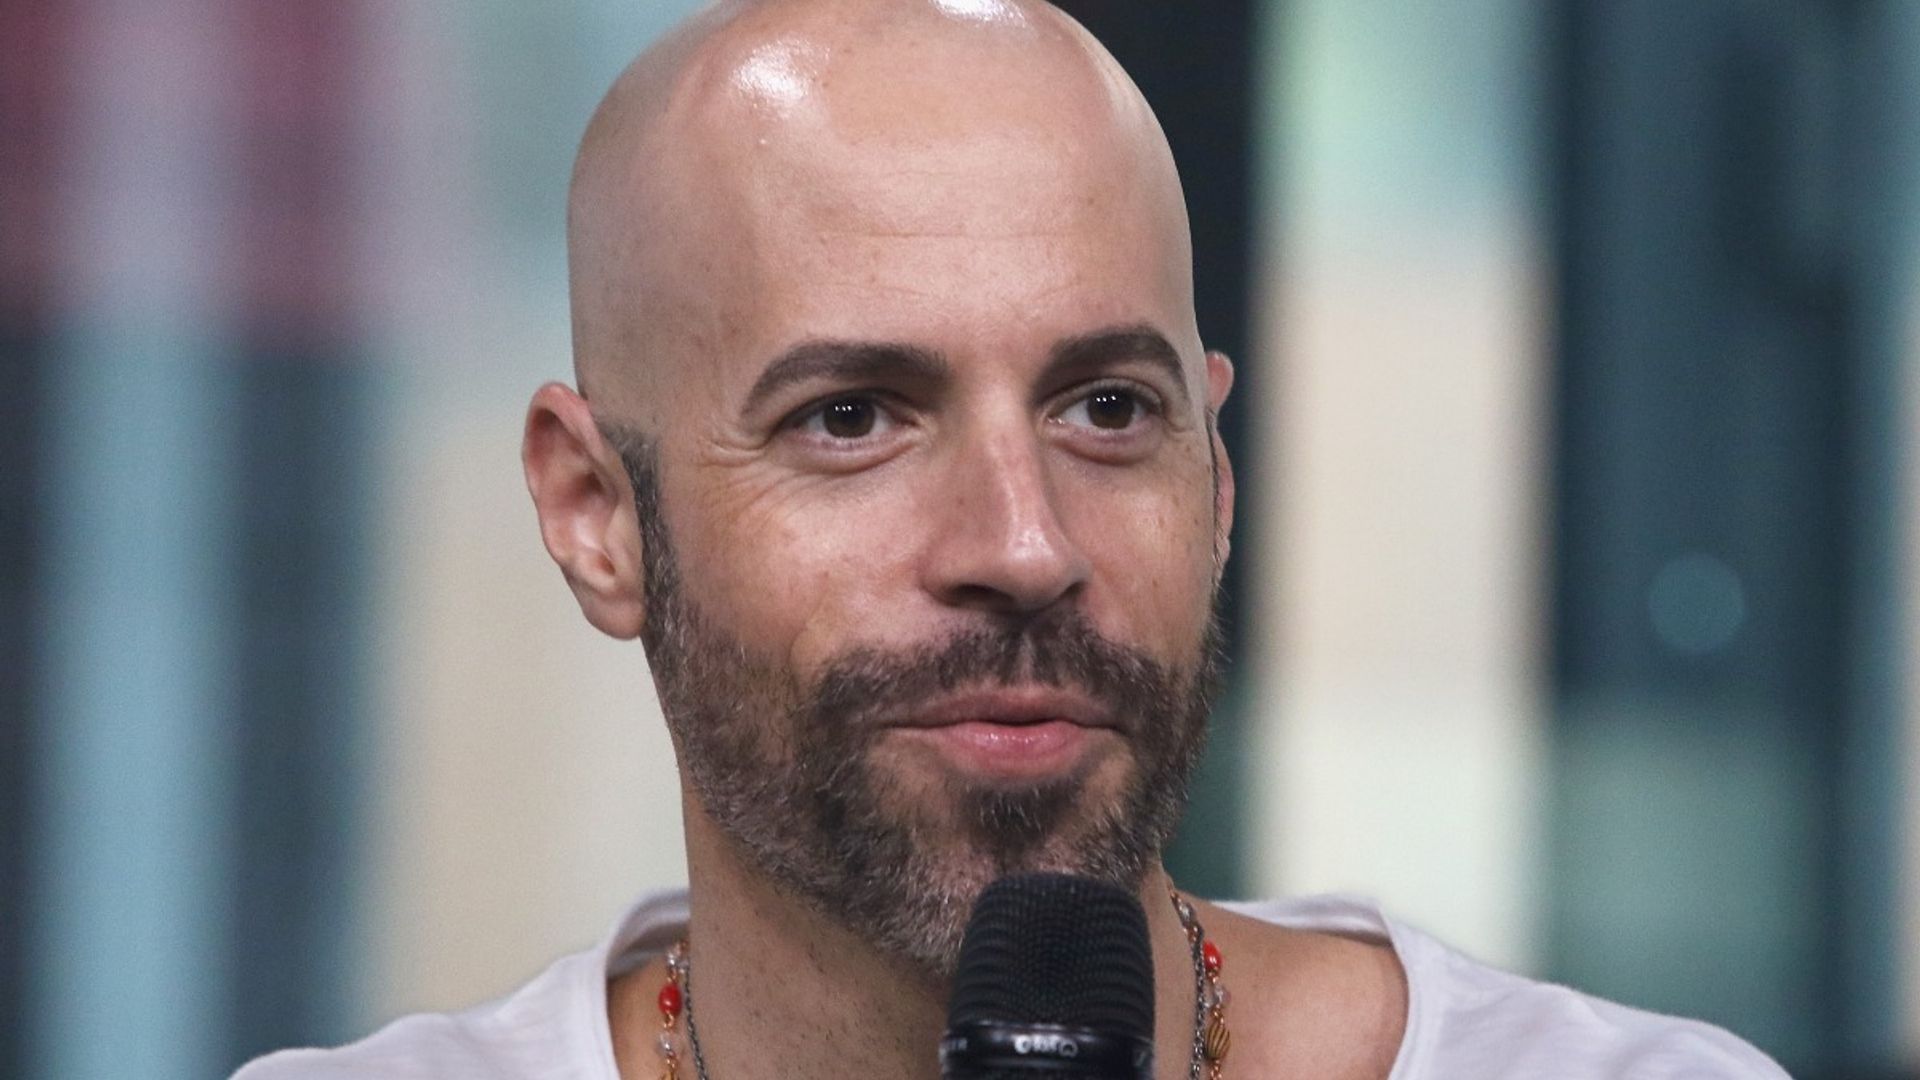 Chris Daughtry 'absolutely devastated' as cops tell family daughter's death was 'homicide'